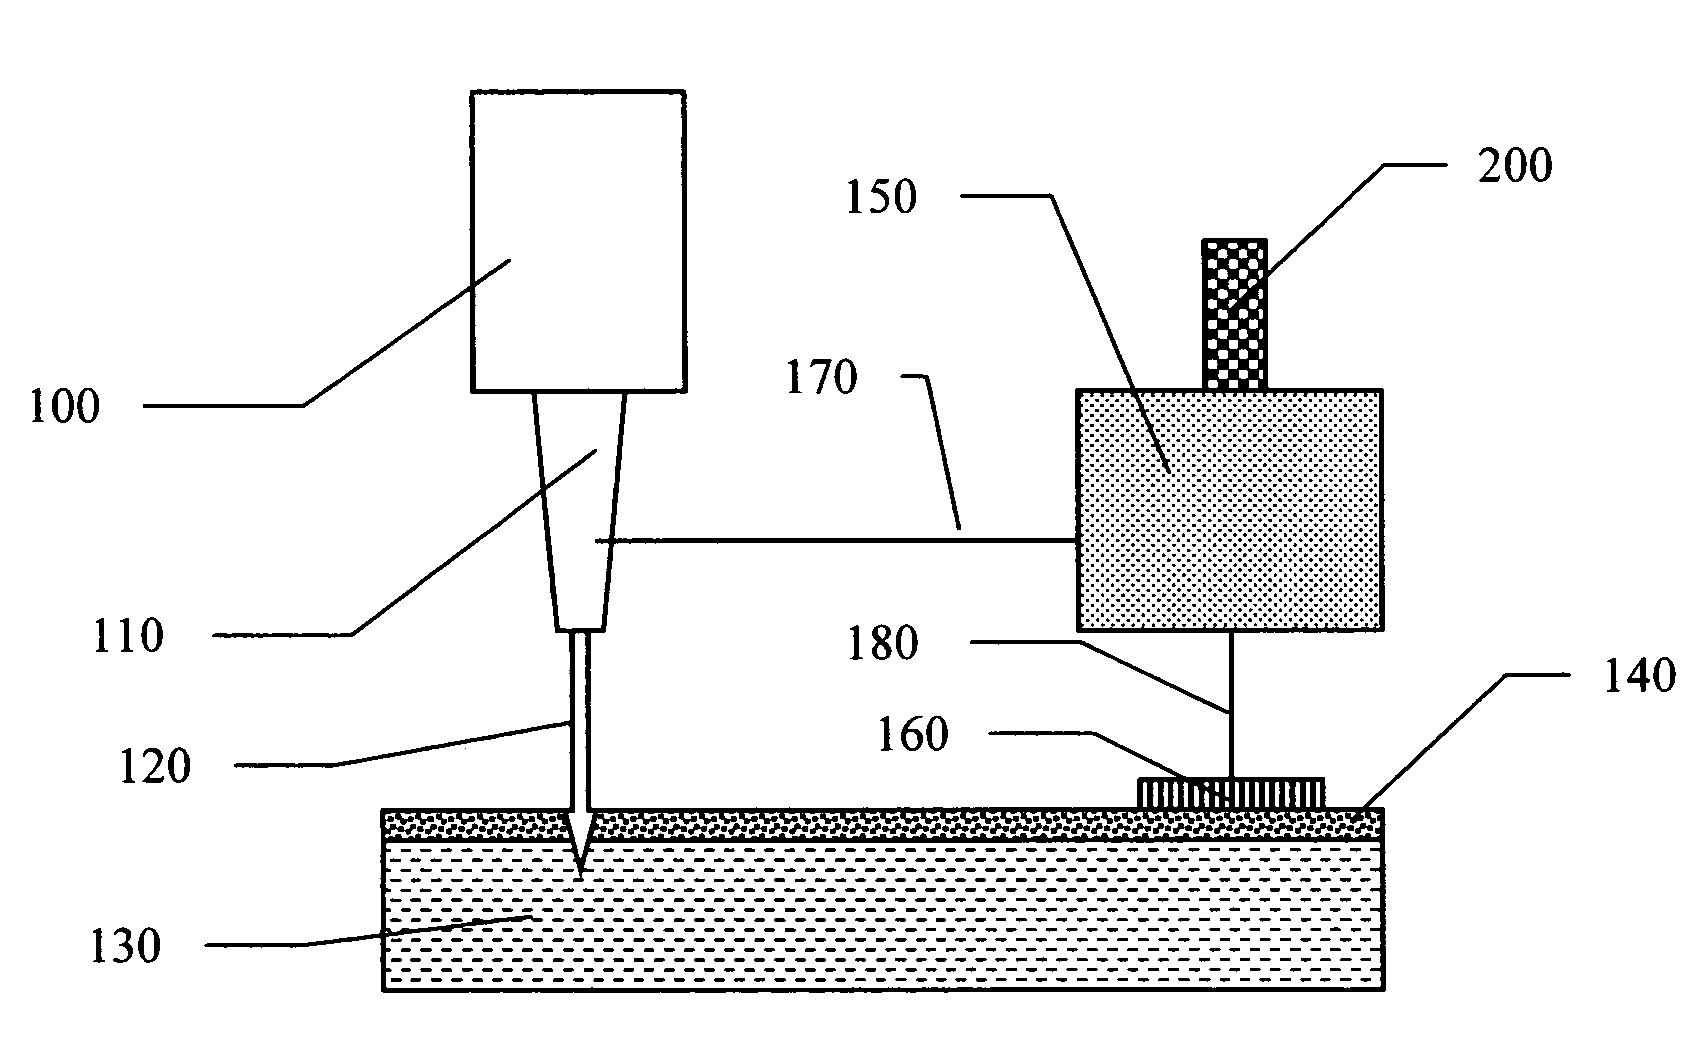 Needleless hypodermic jet injector apparatus and method